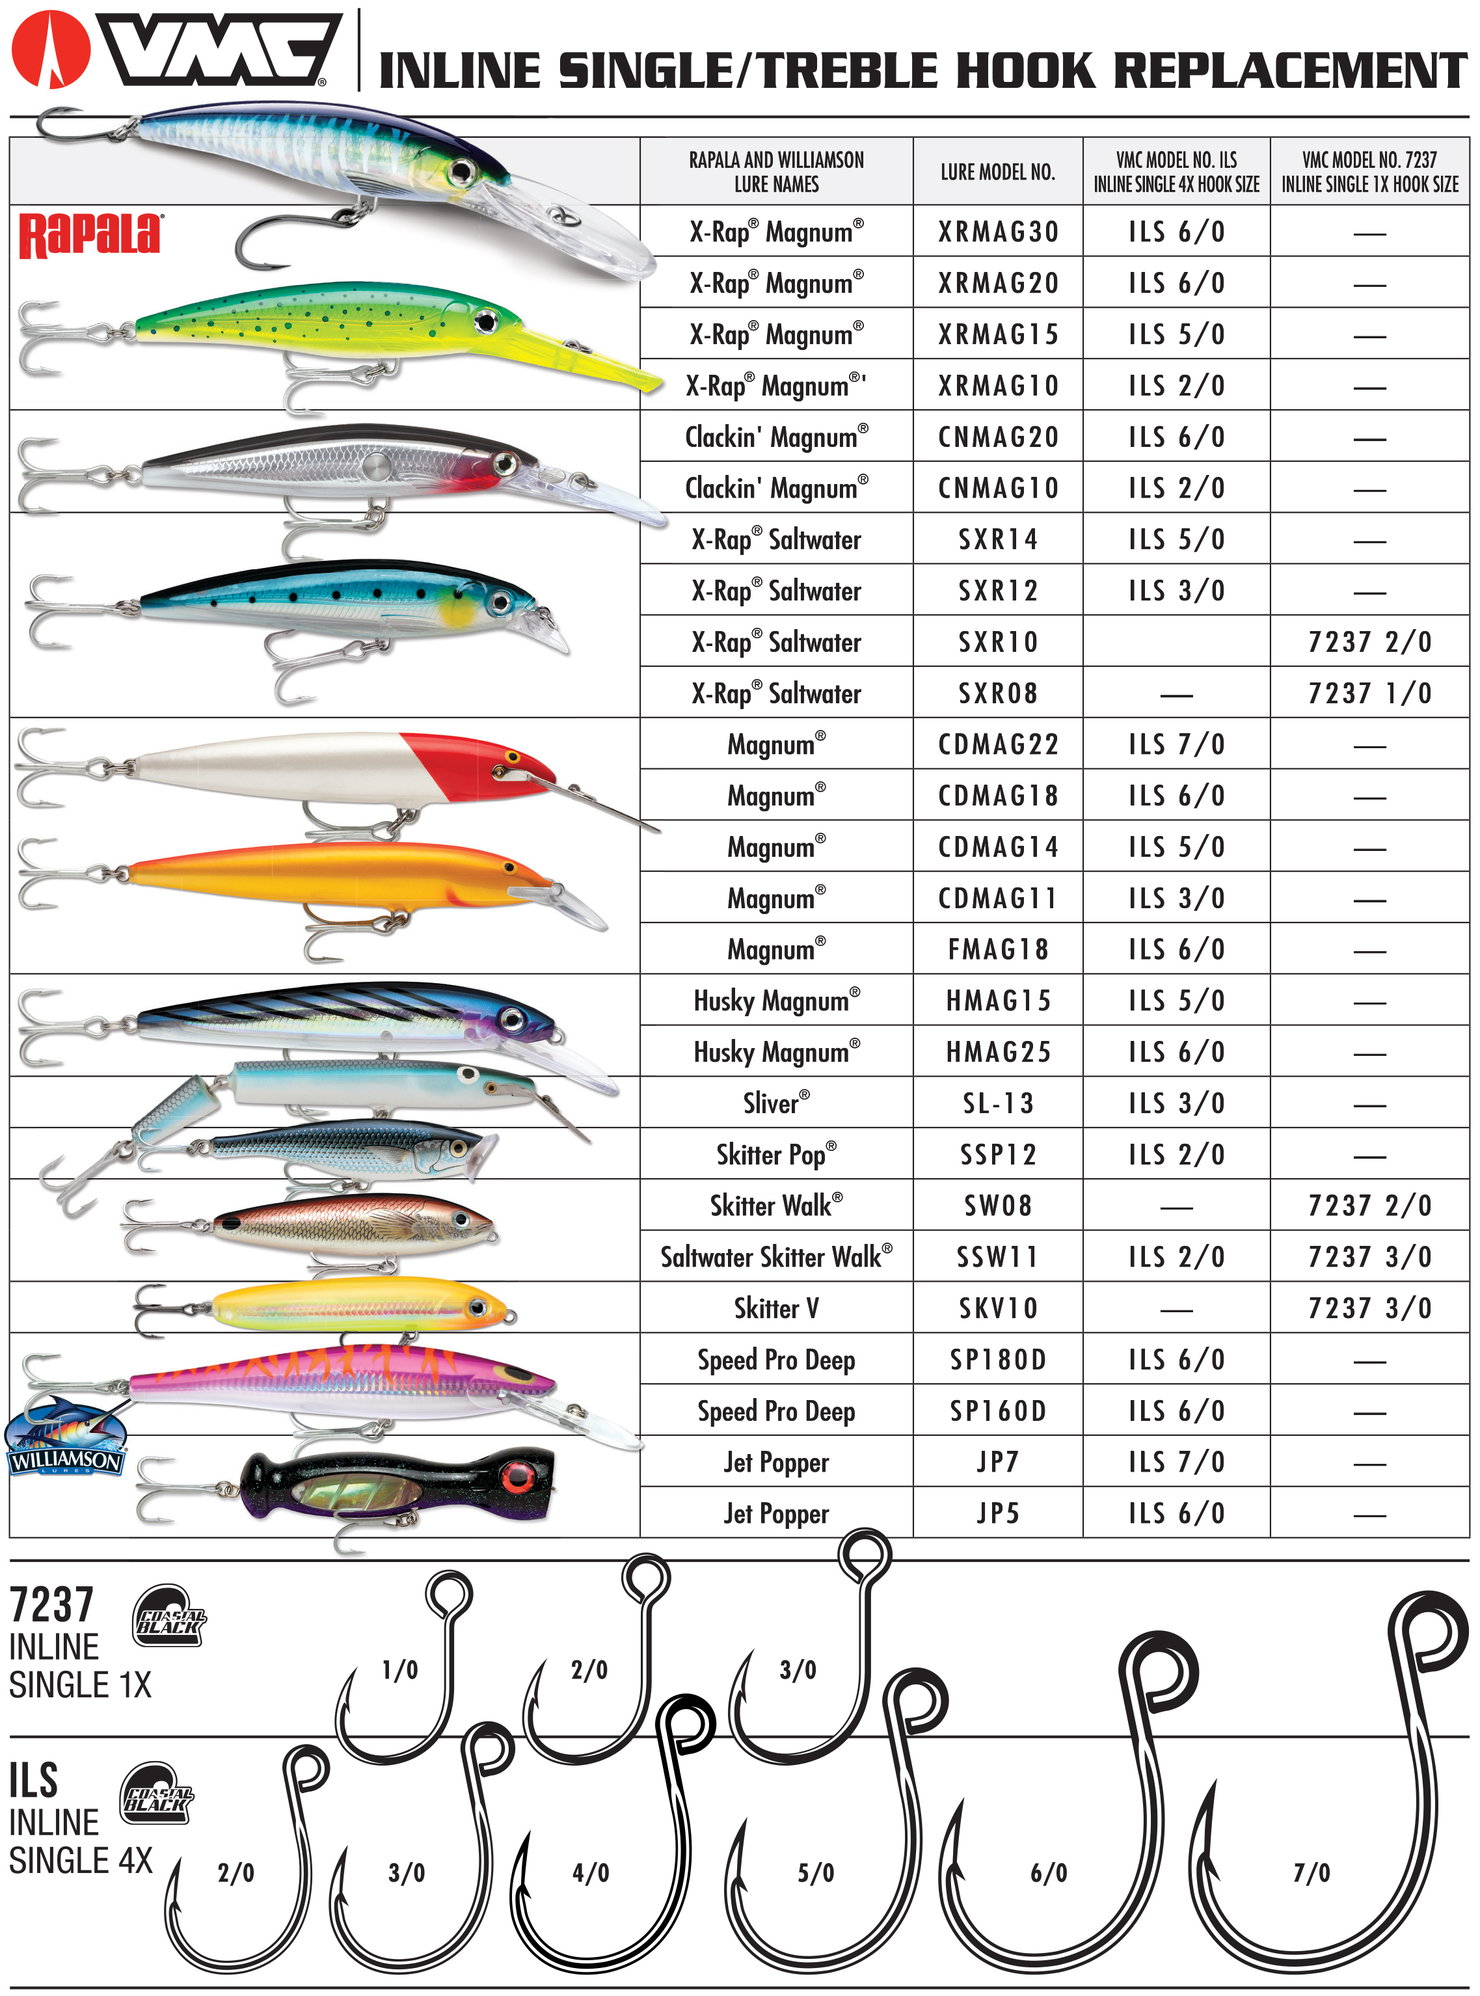 Replacing trebles with singles? - The Hull Truth - Boating and Fishing Forum